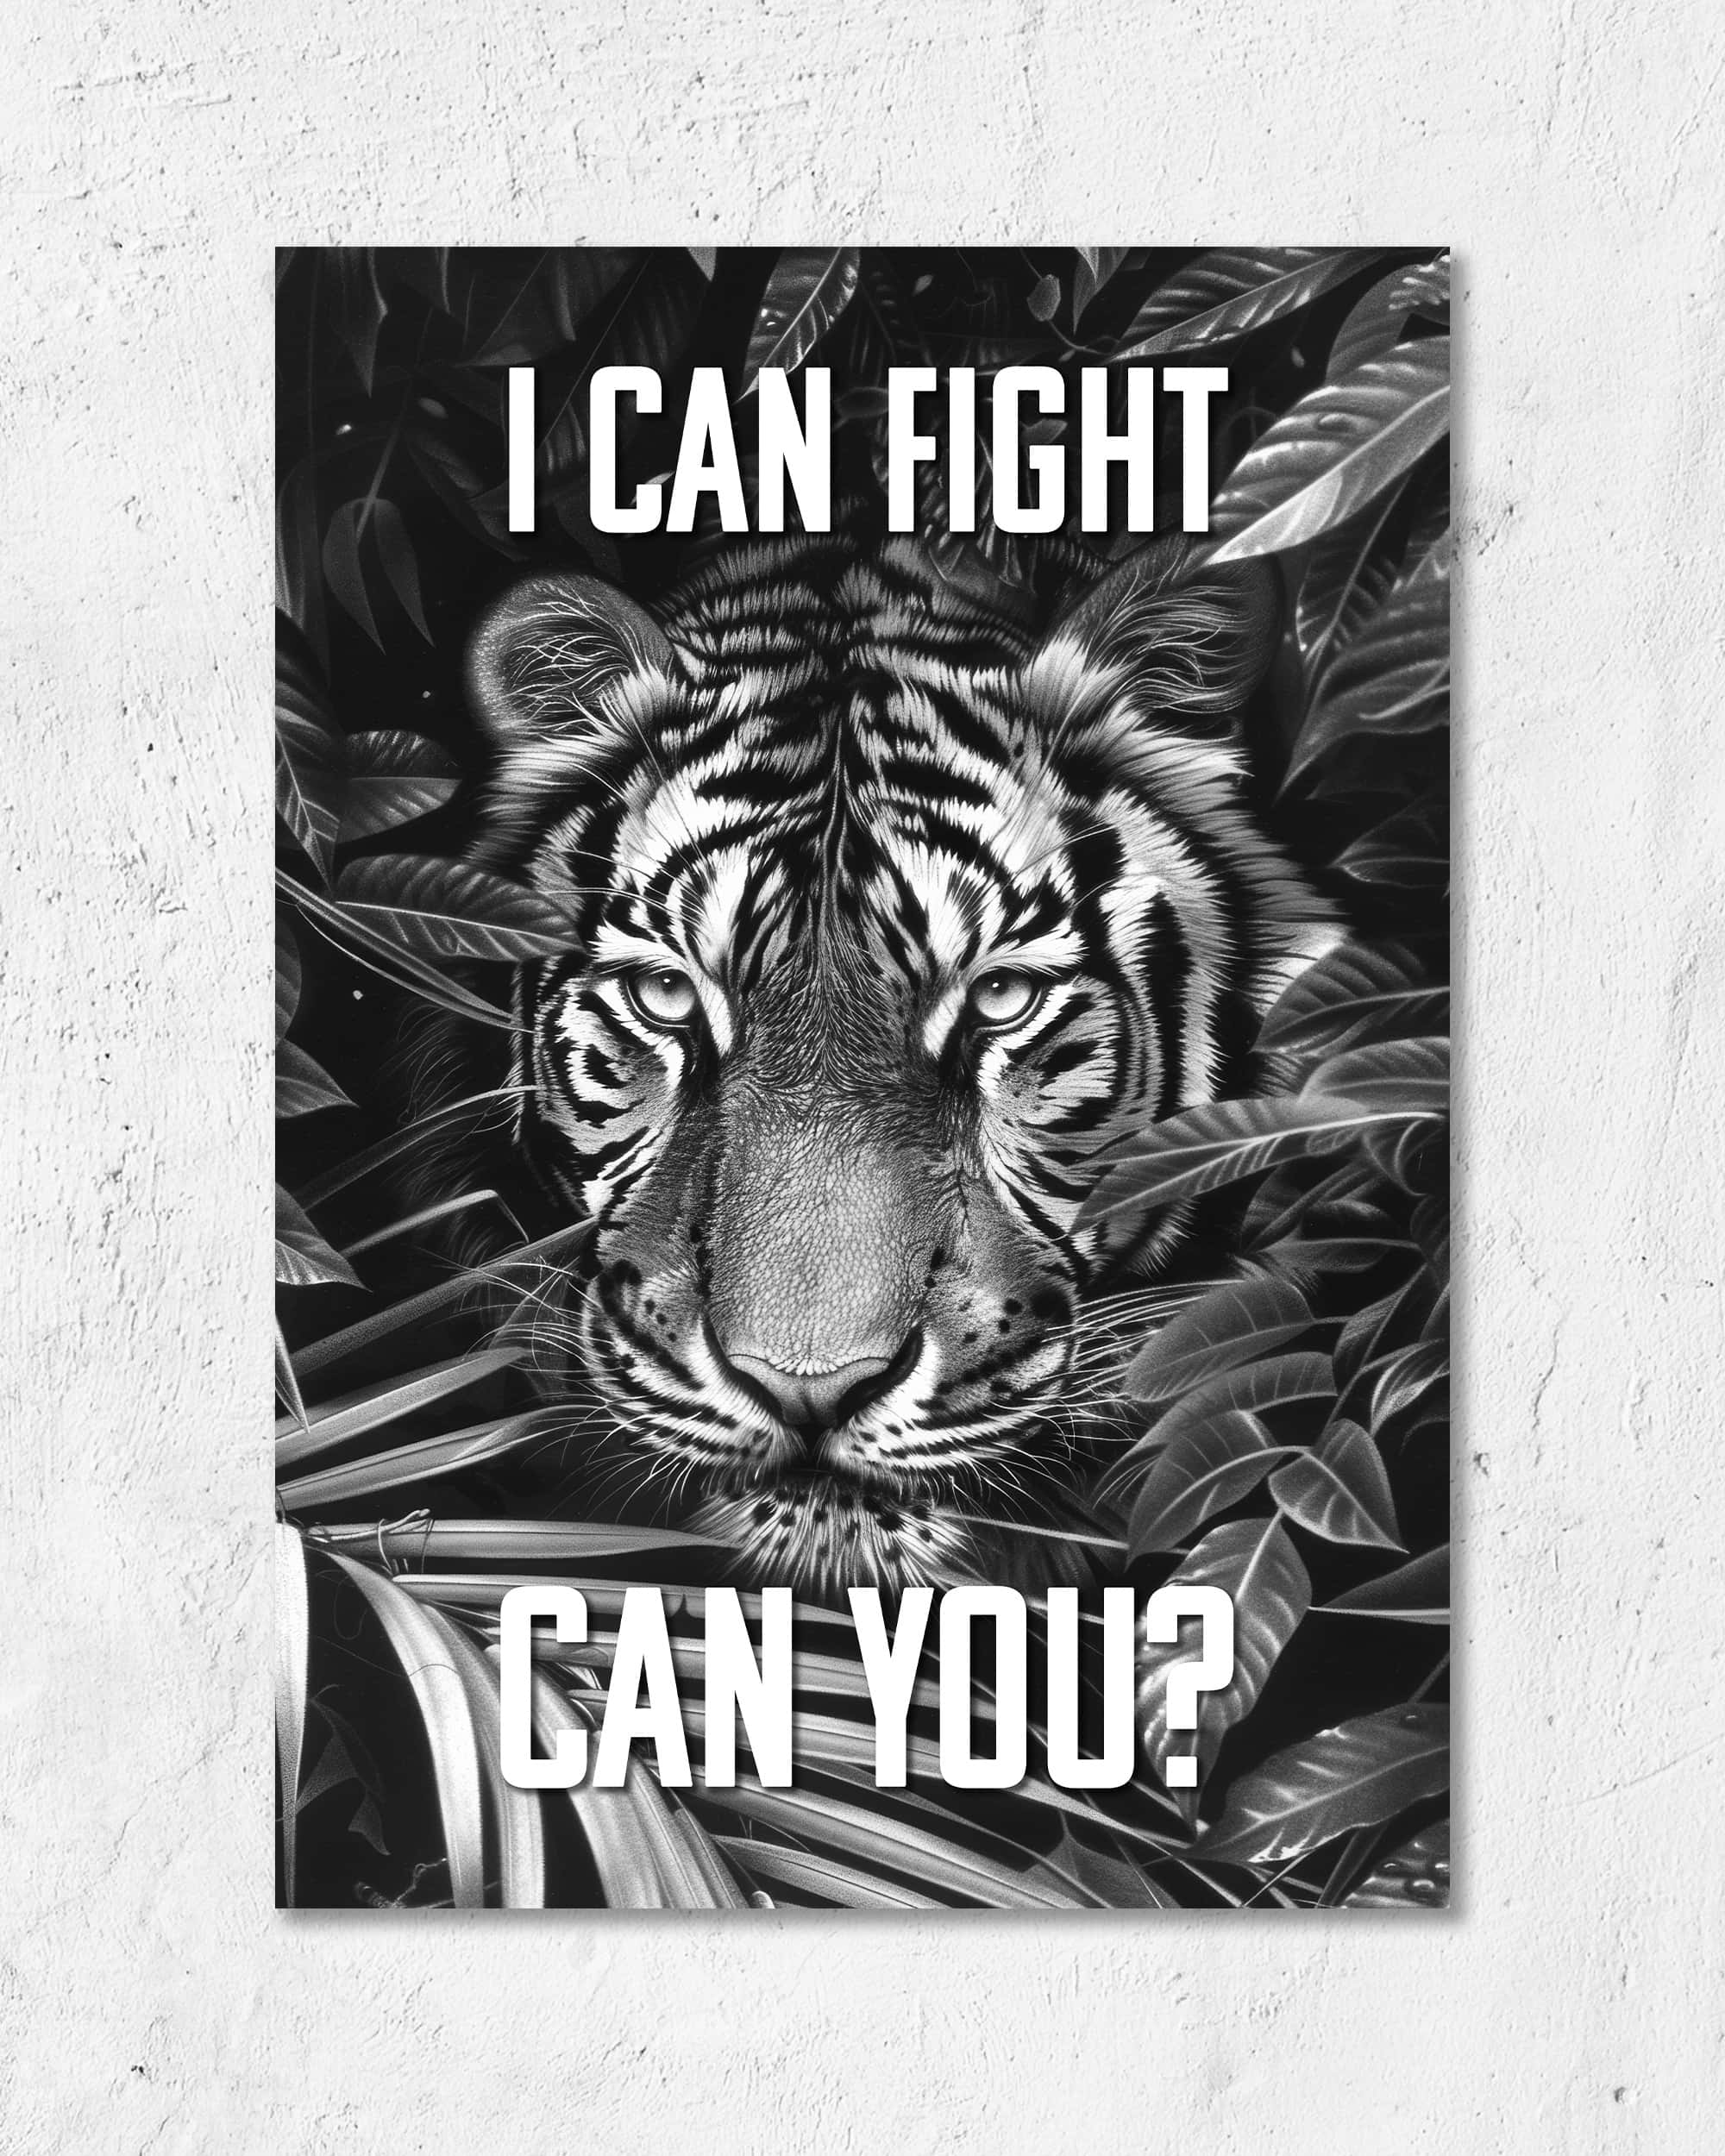 I can fight | Digital Poster